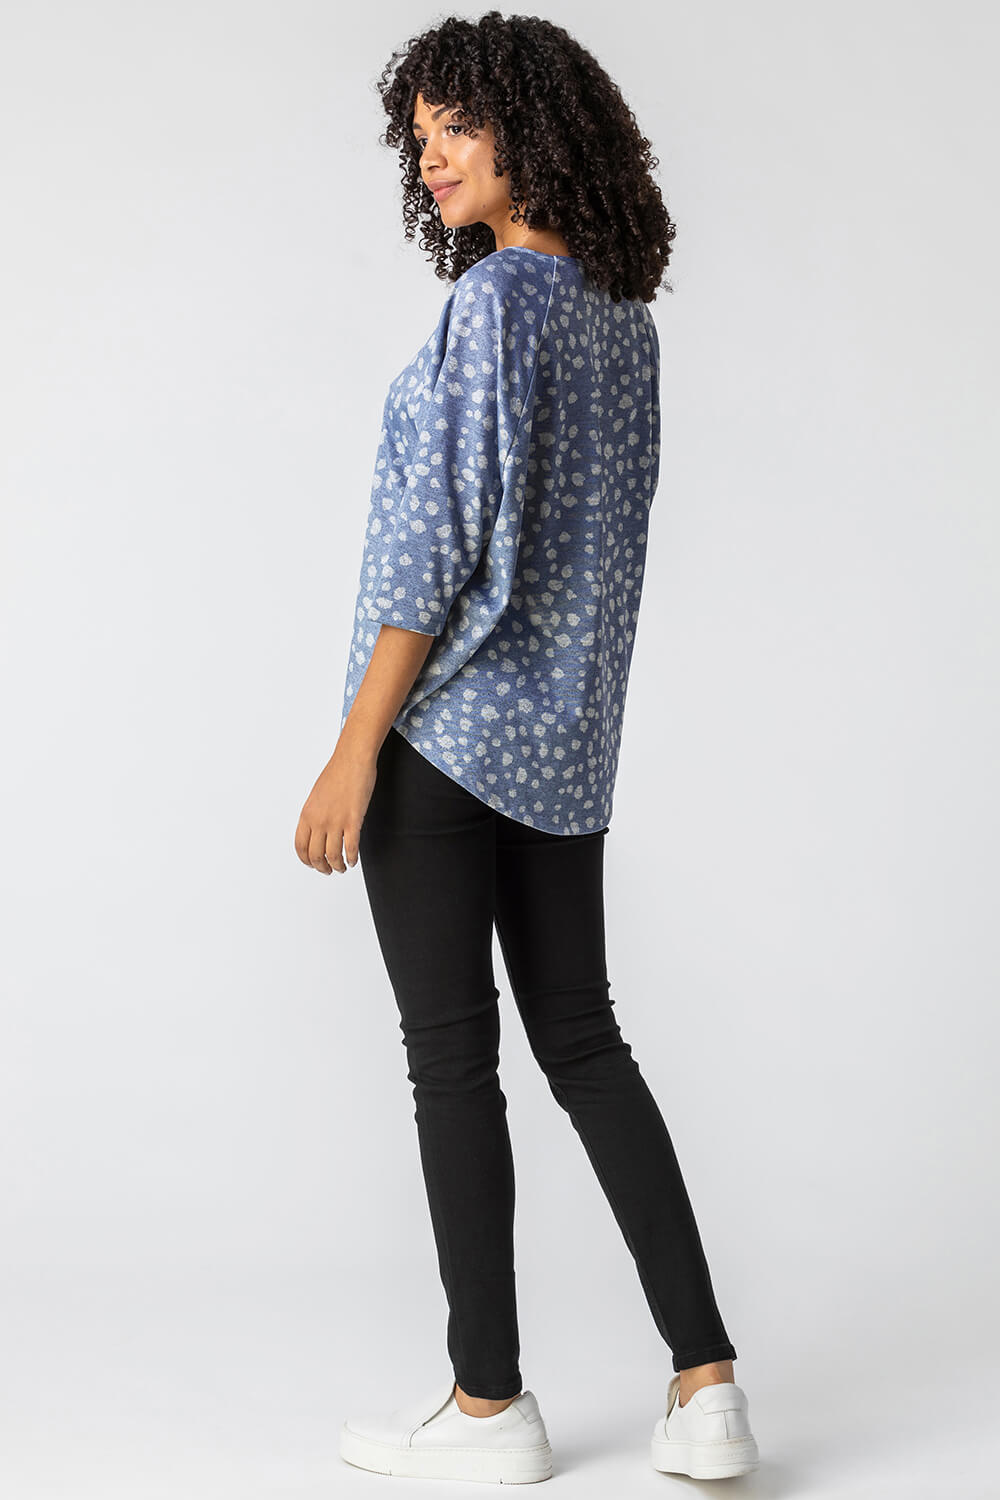 Blue Abstract Spot Print Jersey Top, Image 2 of 5